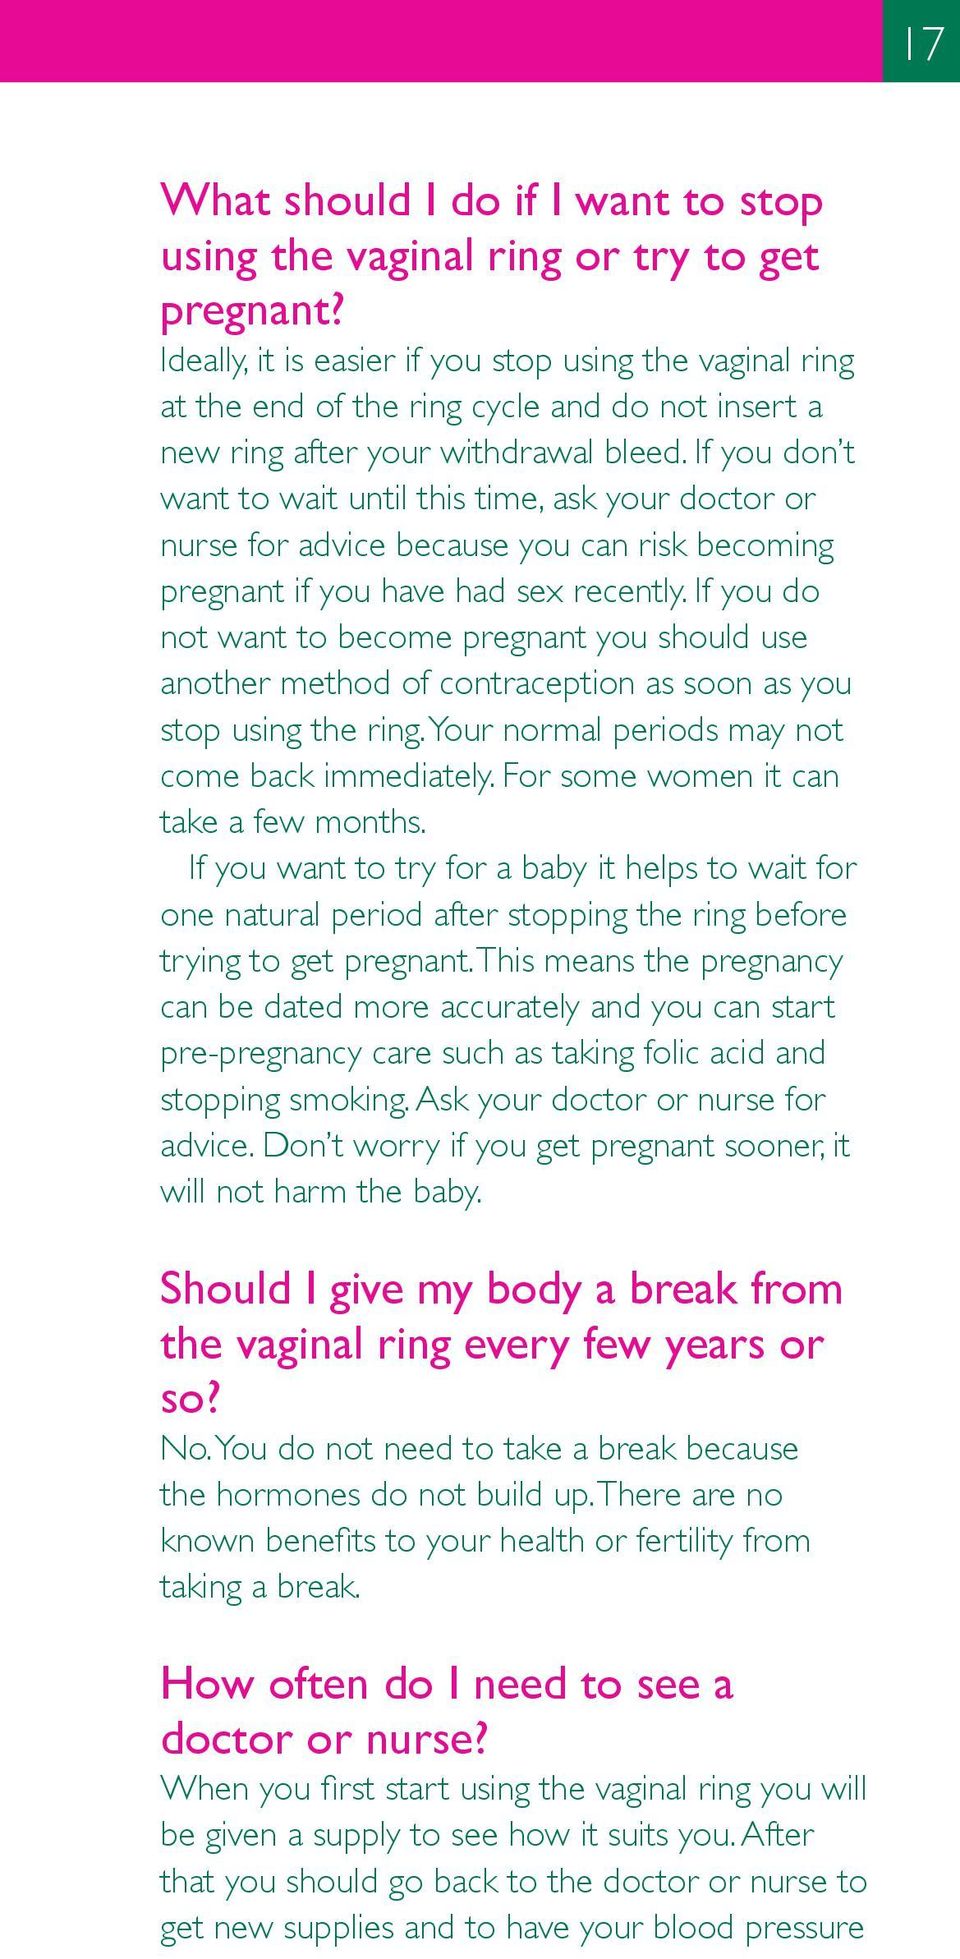 If you don t want to wait until this time, ask your doctor or nurse for advice because you can risk becoming pregnant if you have had sex recently.